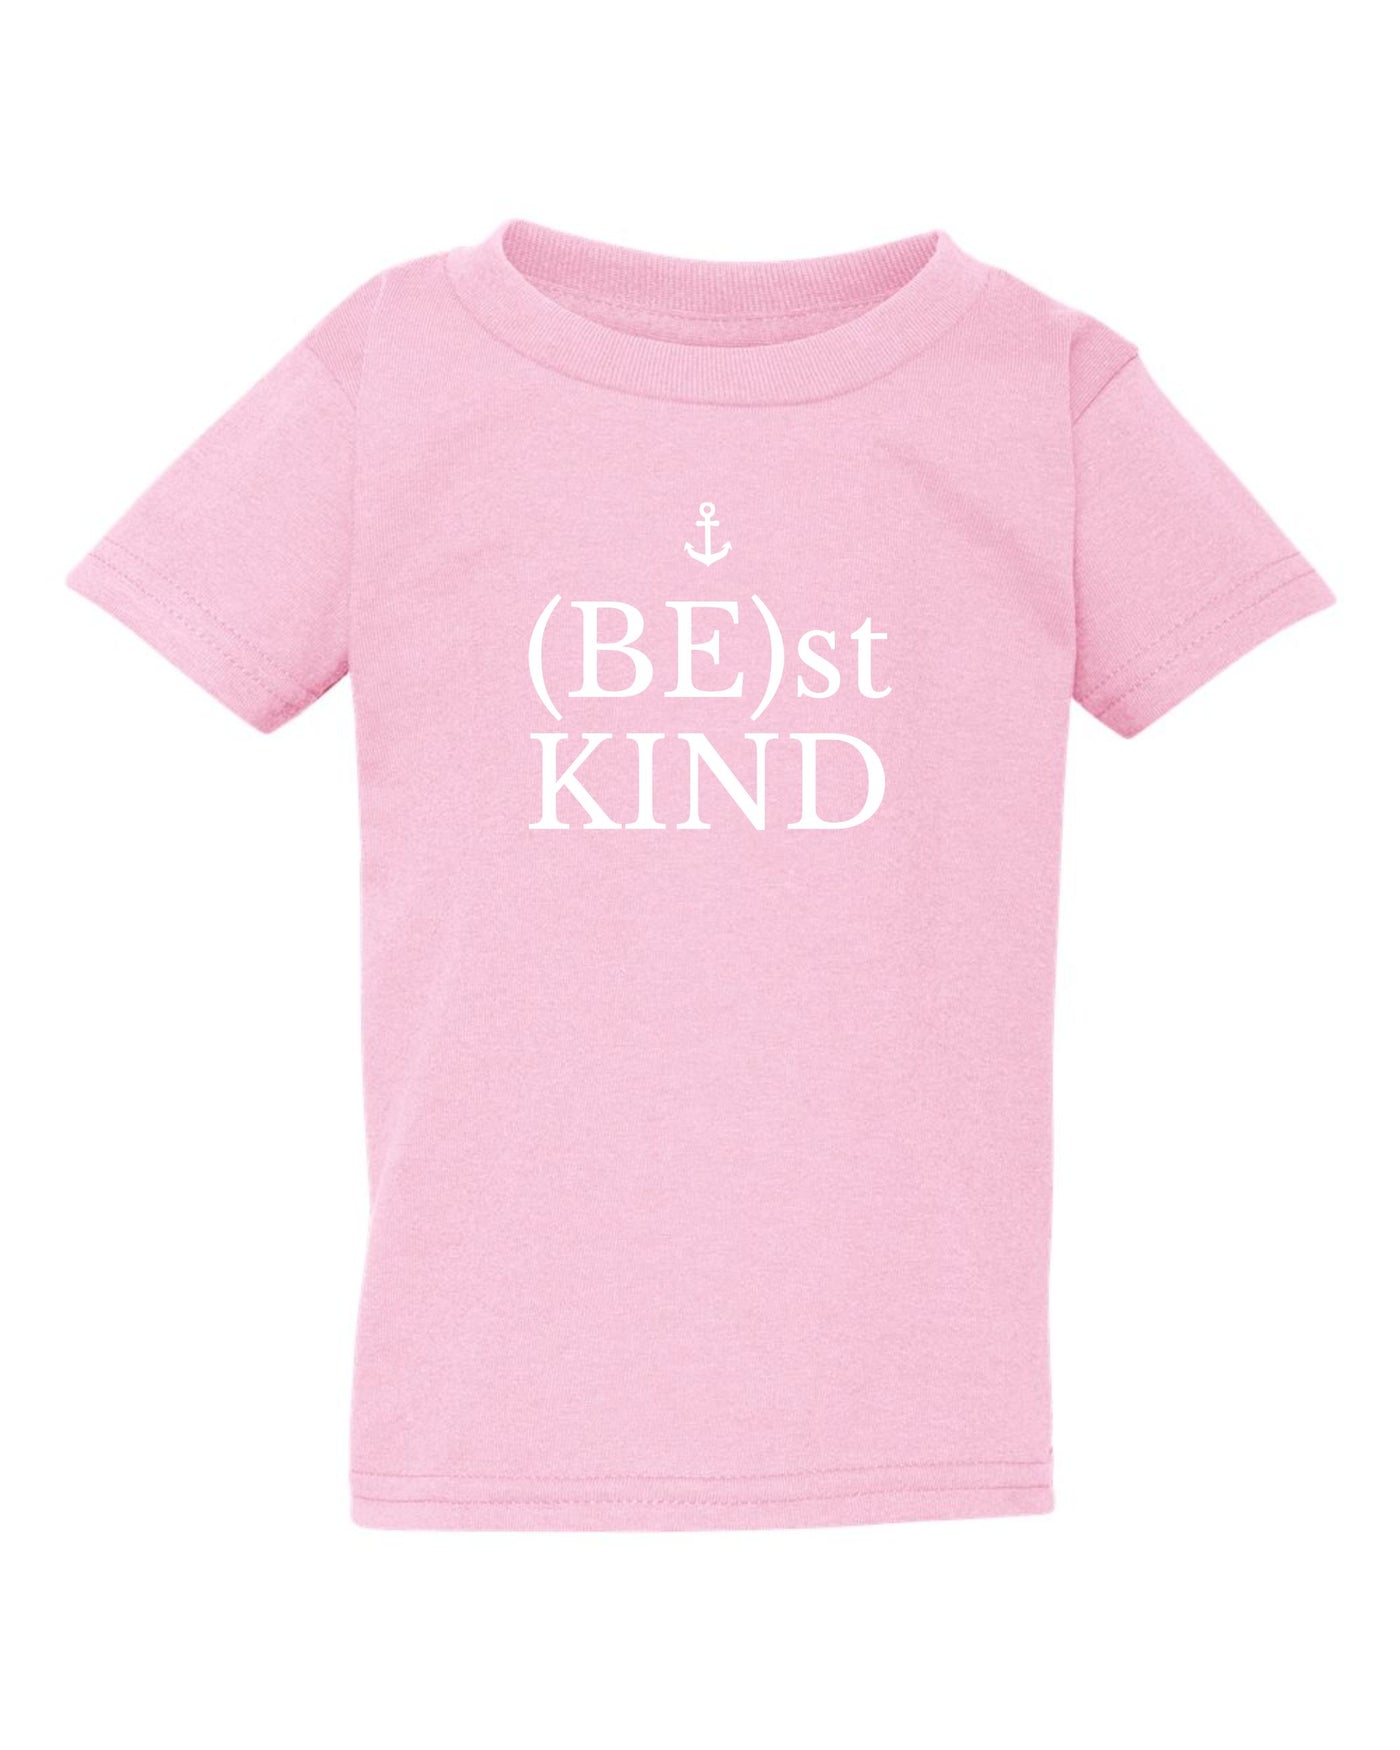 "(BE)st KIND" Toddler/Youth T-Shirt